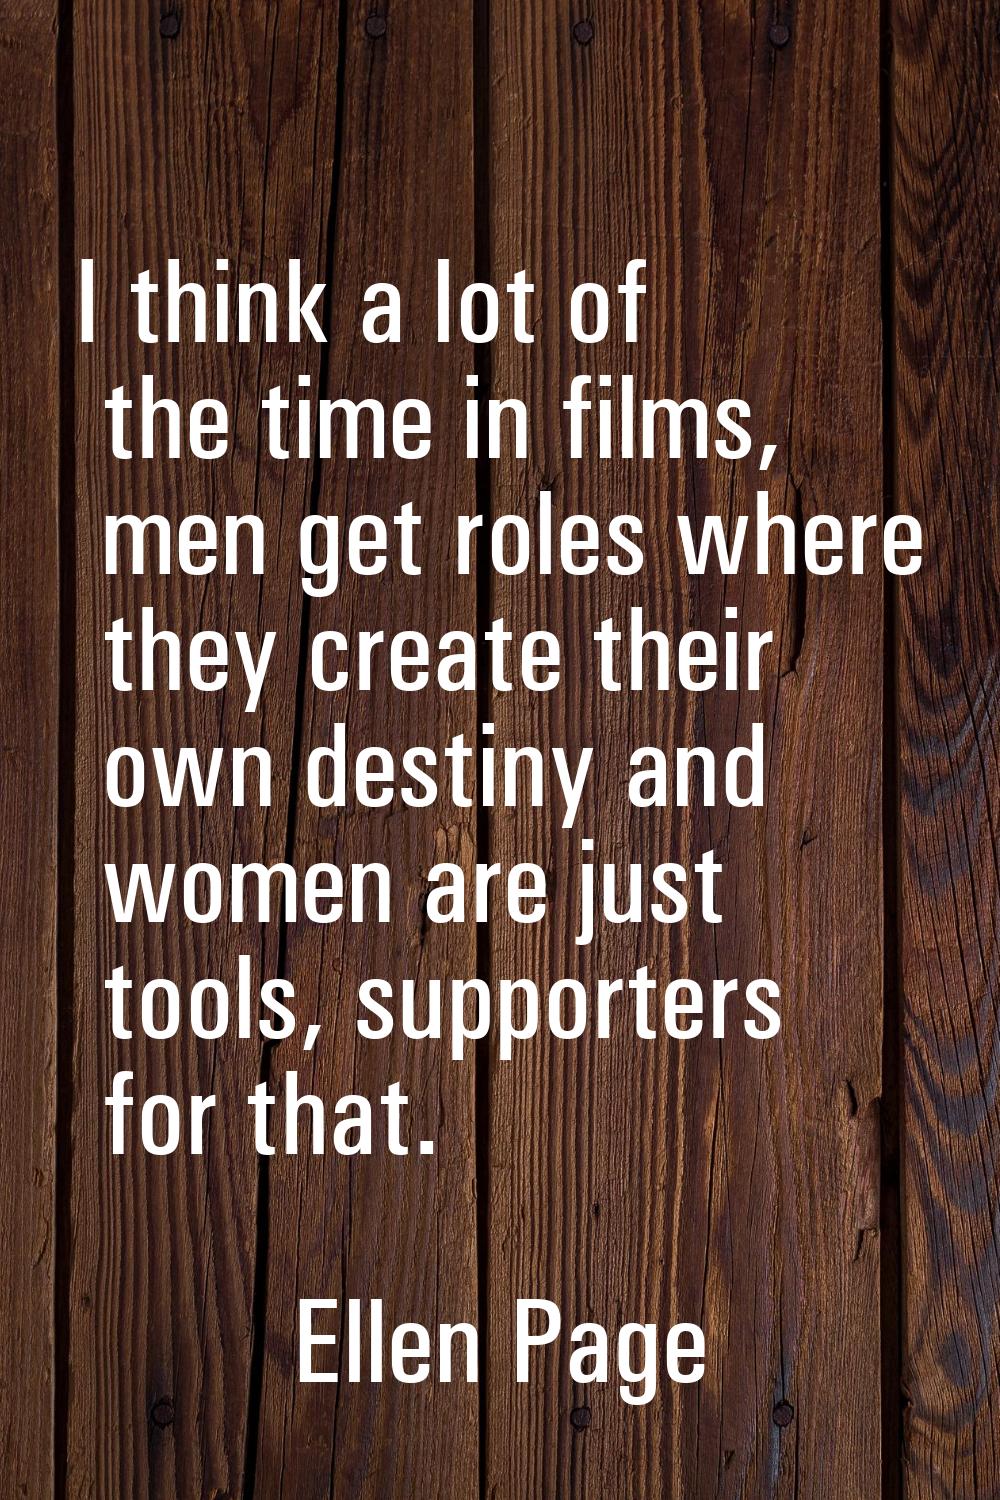 I think a lot of the time in films, men get roles where they create their own destiny and women are